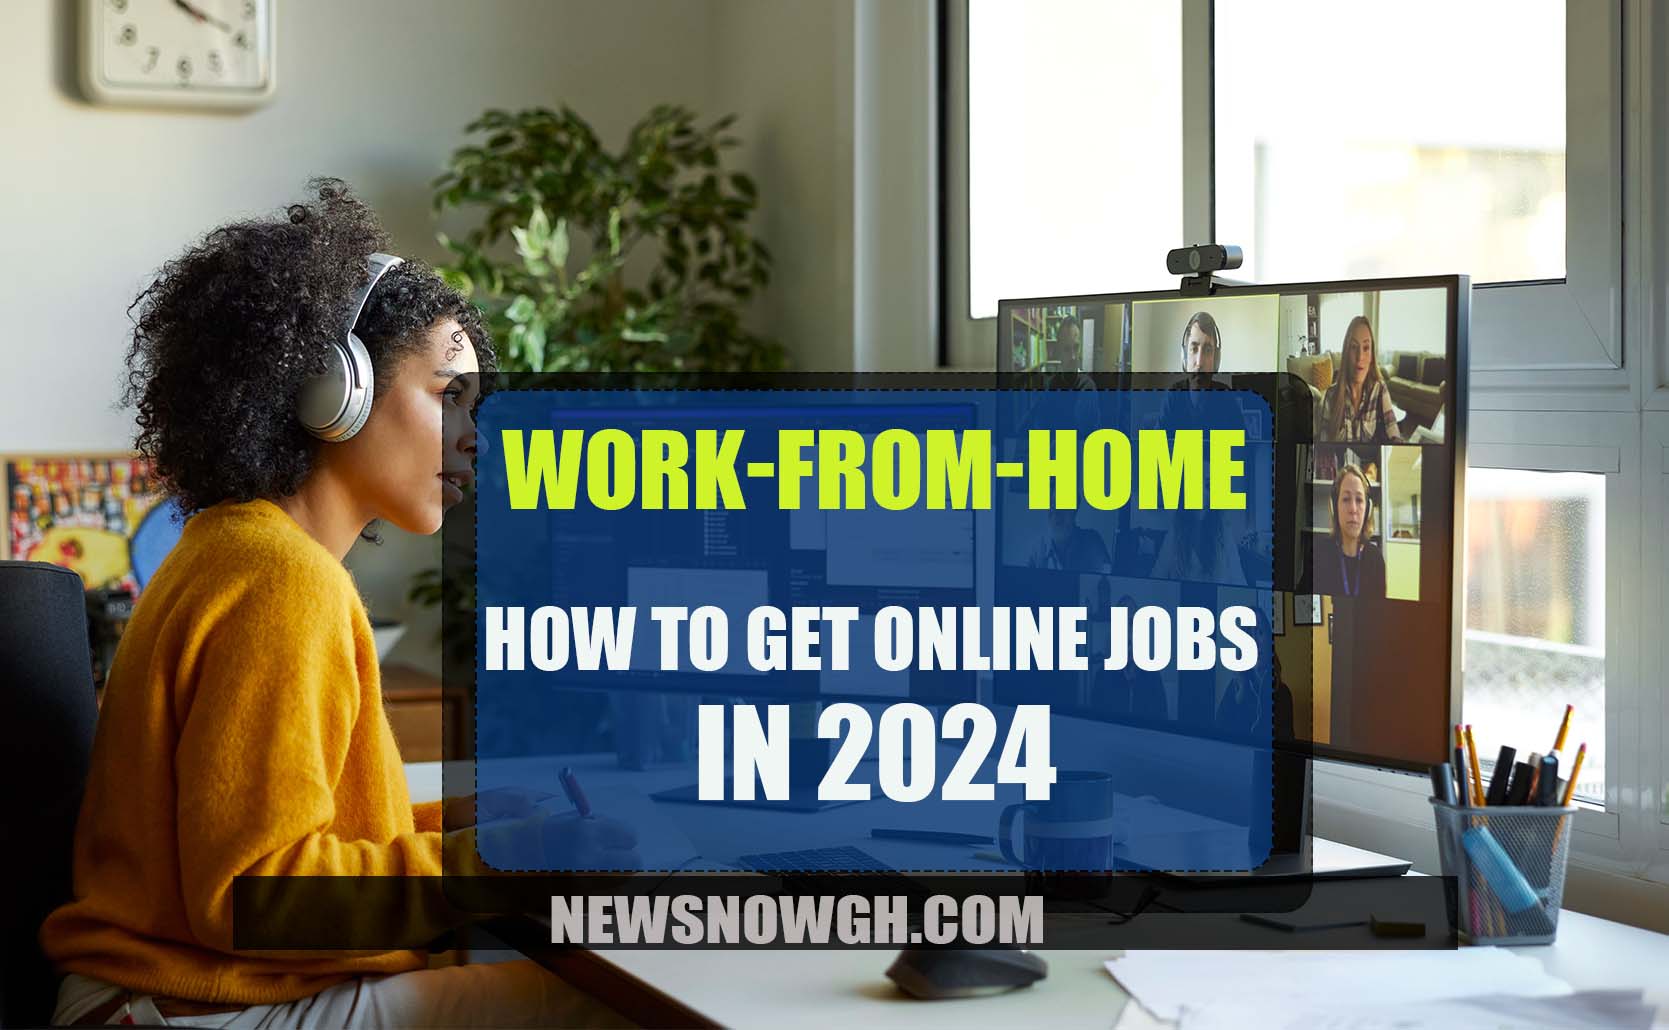 How To Get Online Jobs in 2024 WorkFromHome